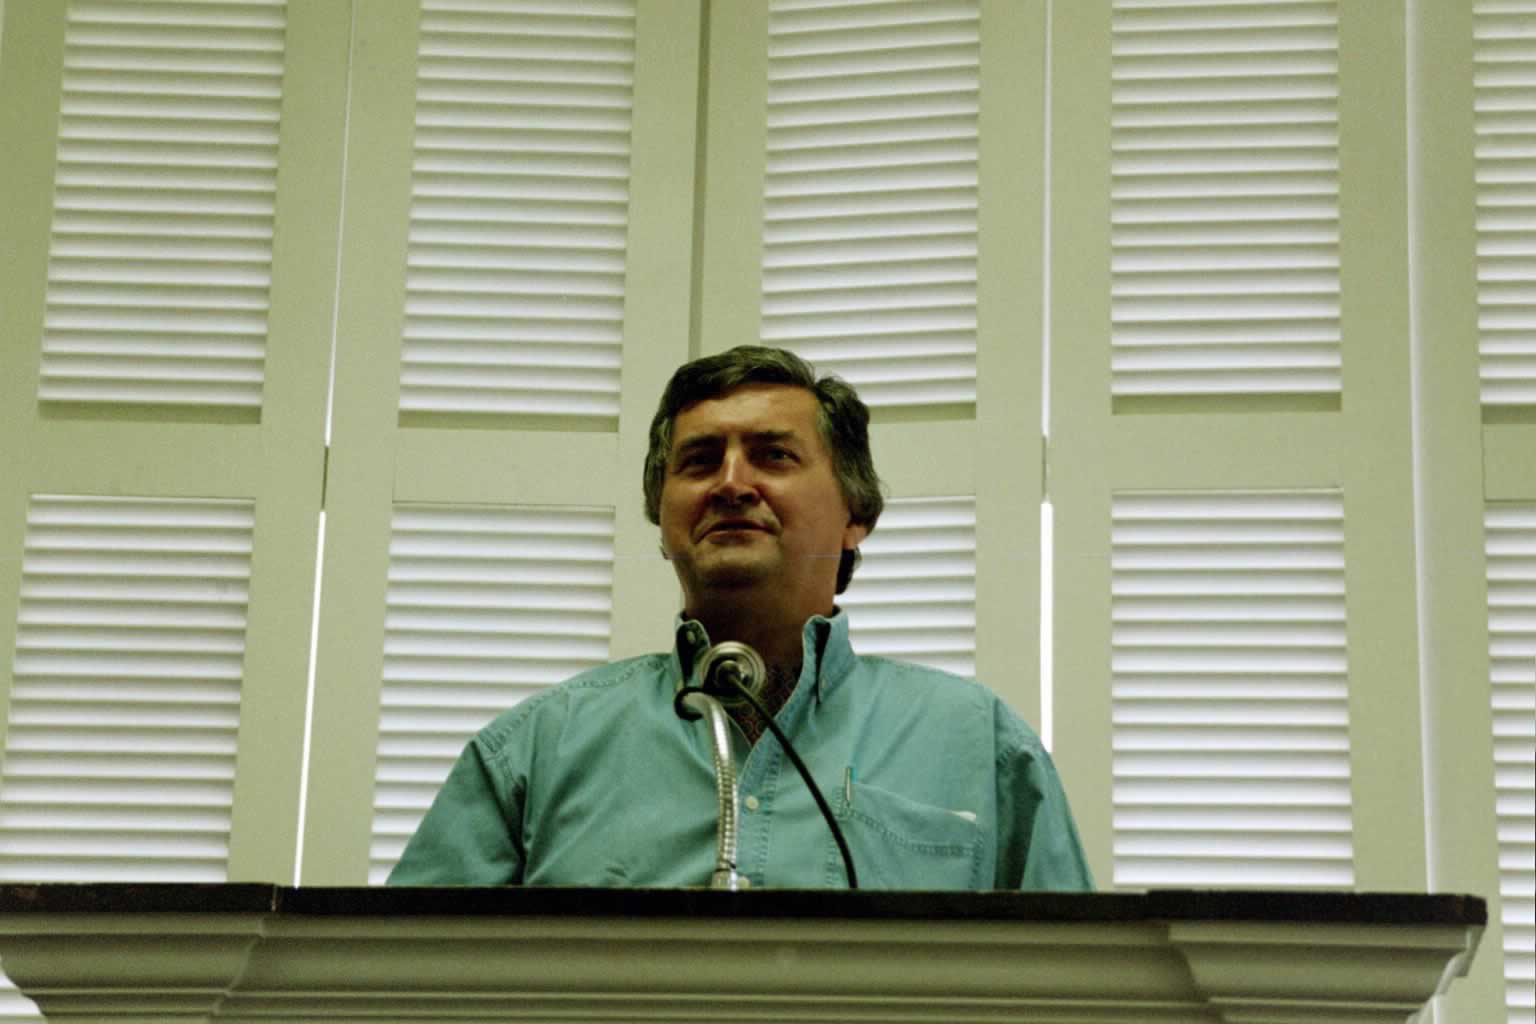 picture of Paul Marshall standing in front of a podium speaking wearing a green shirt